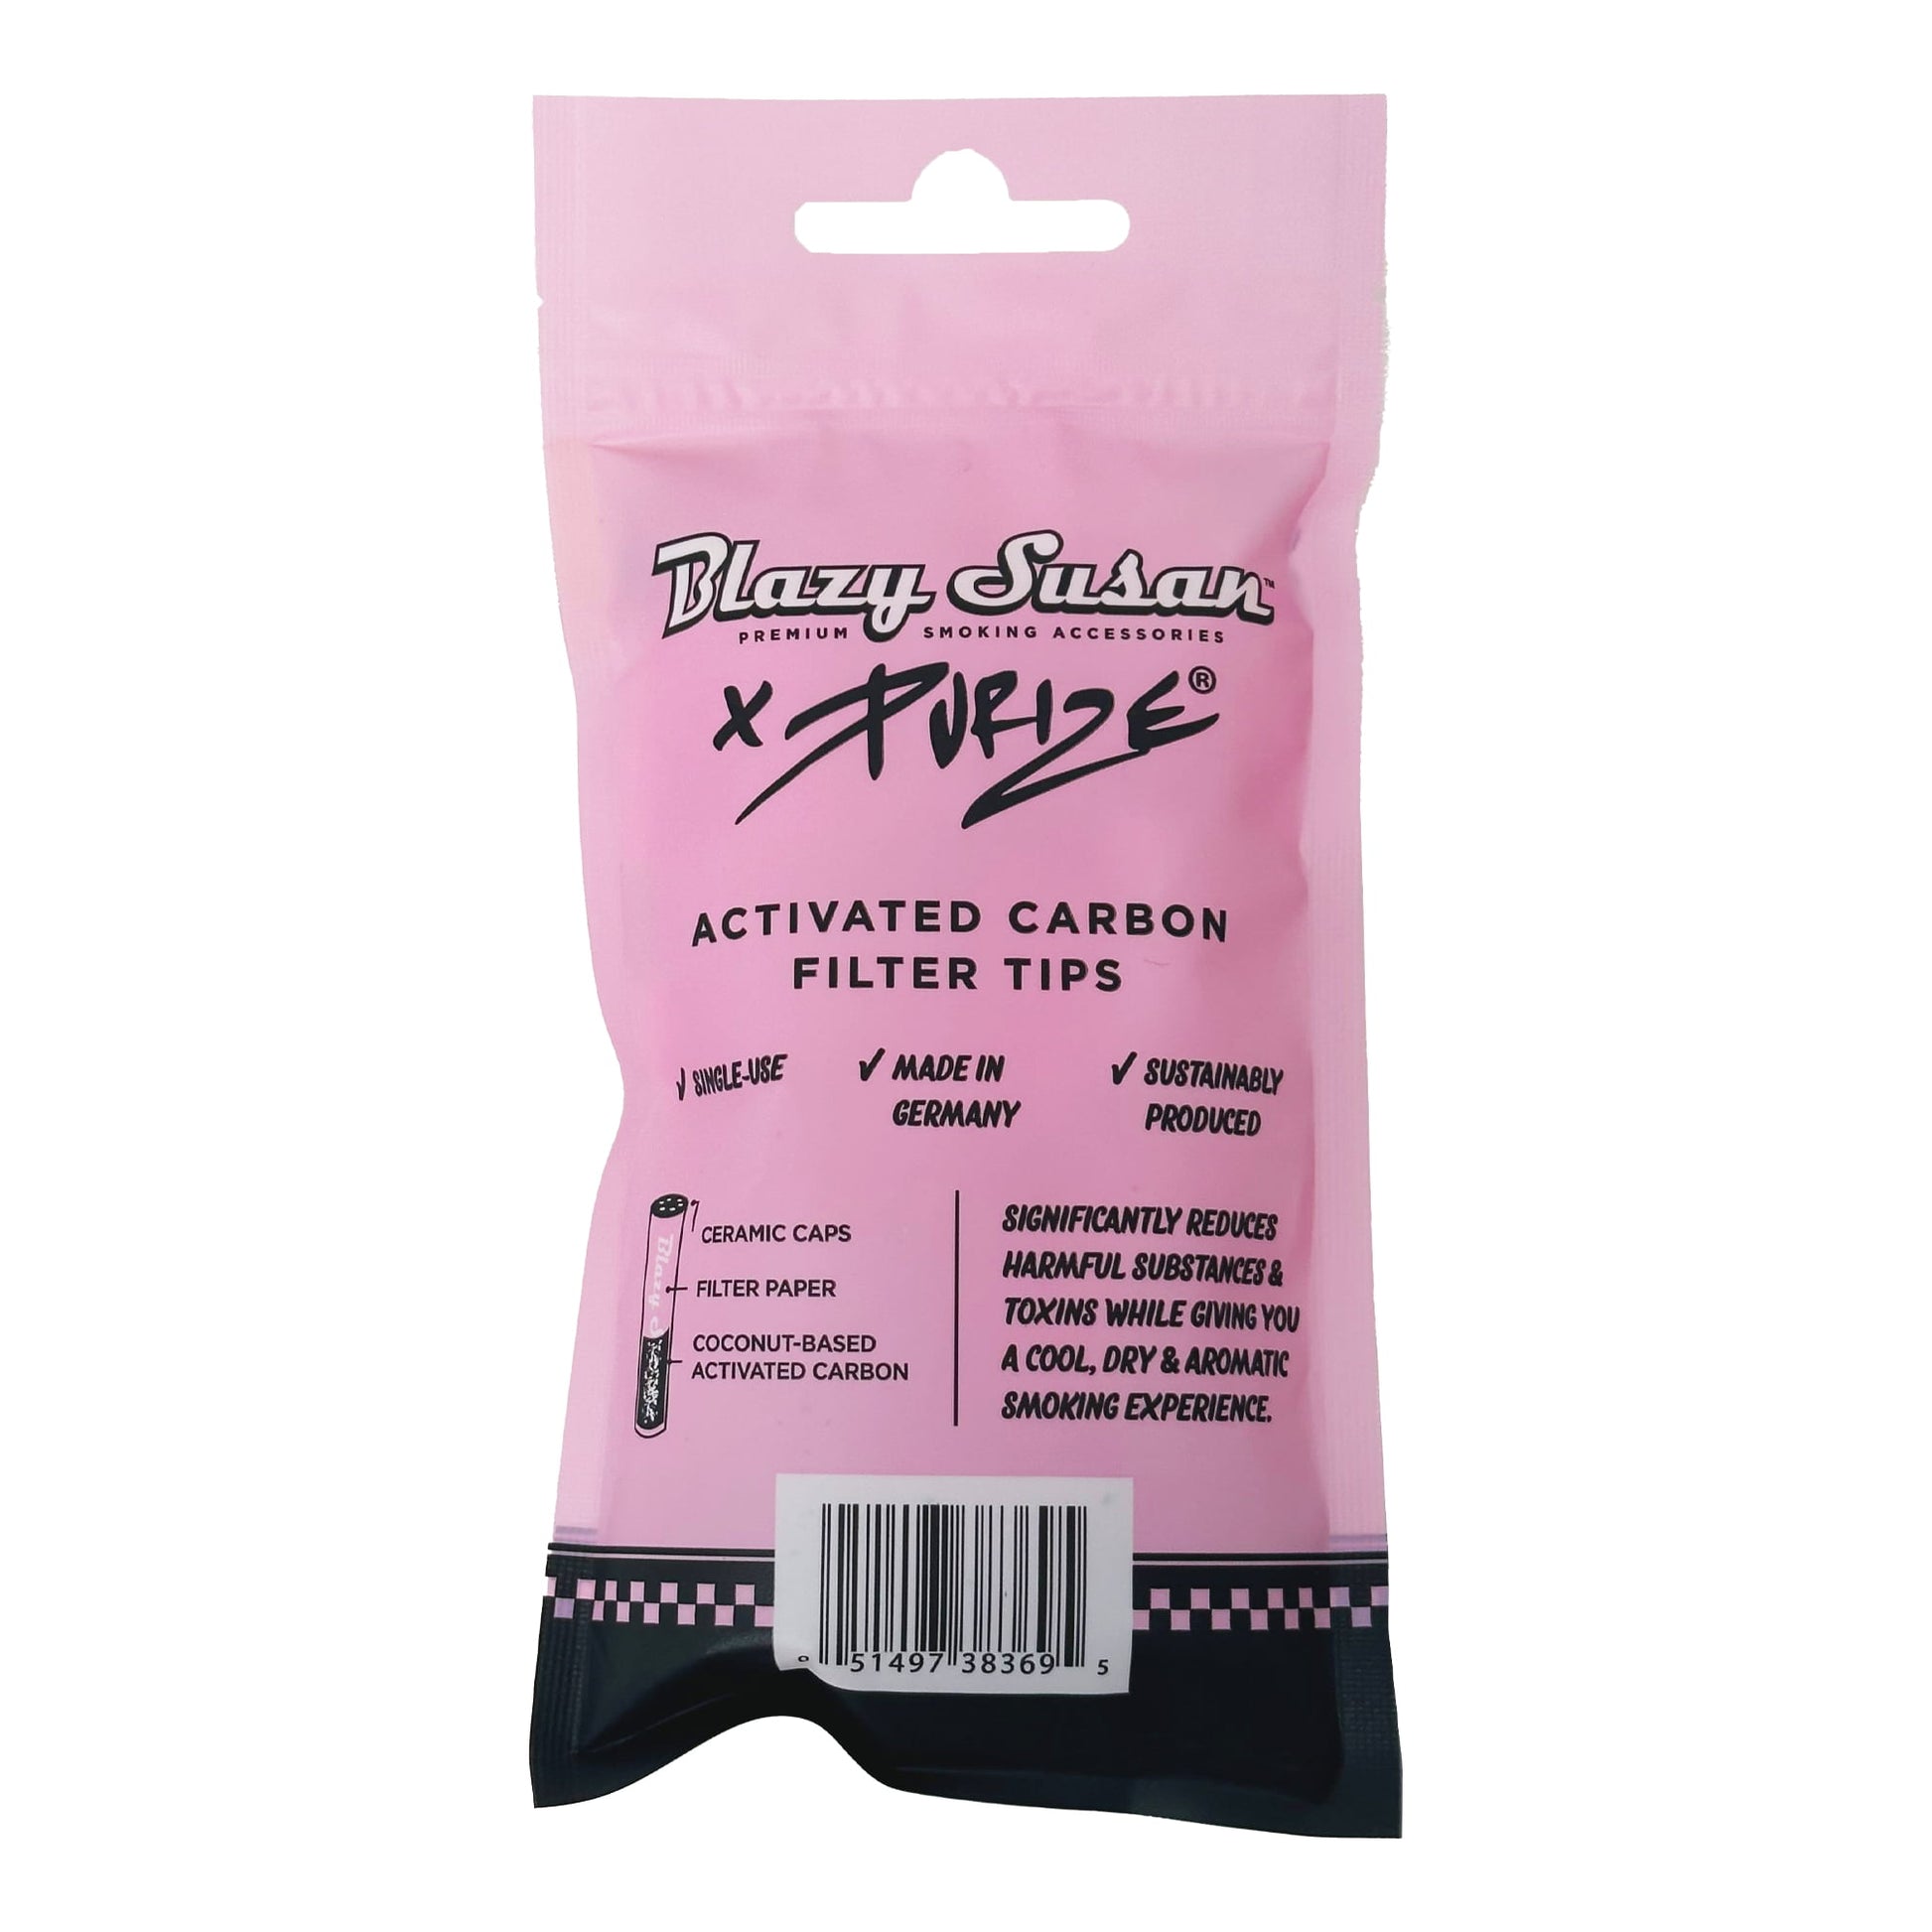 Blazy Susan Activated Carbon Filter Tips | Xtra Slim | 50ct Bag - 10 pack